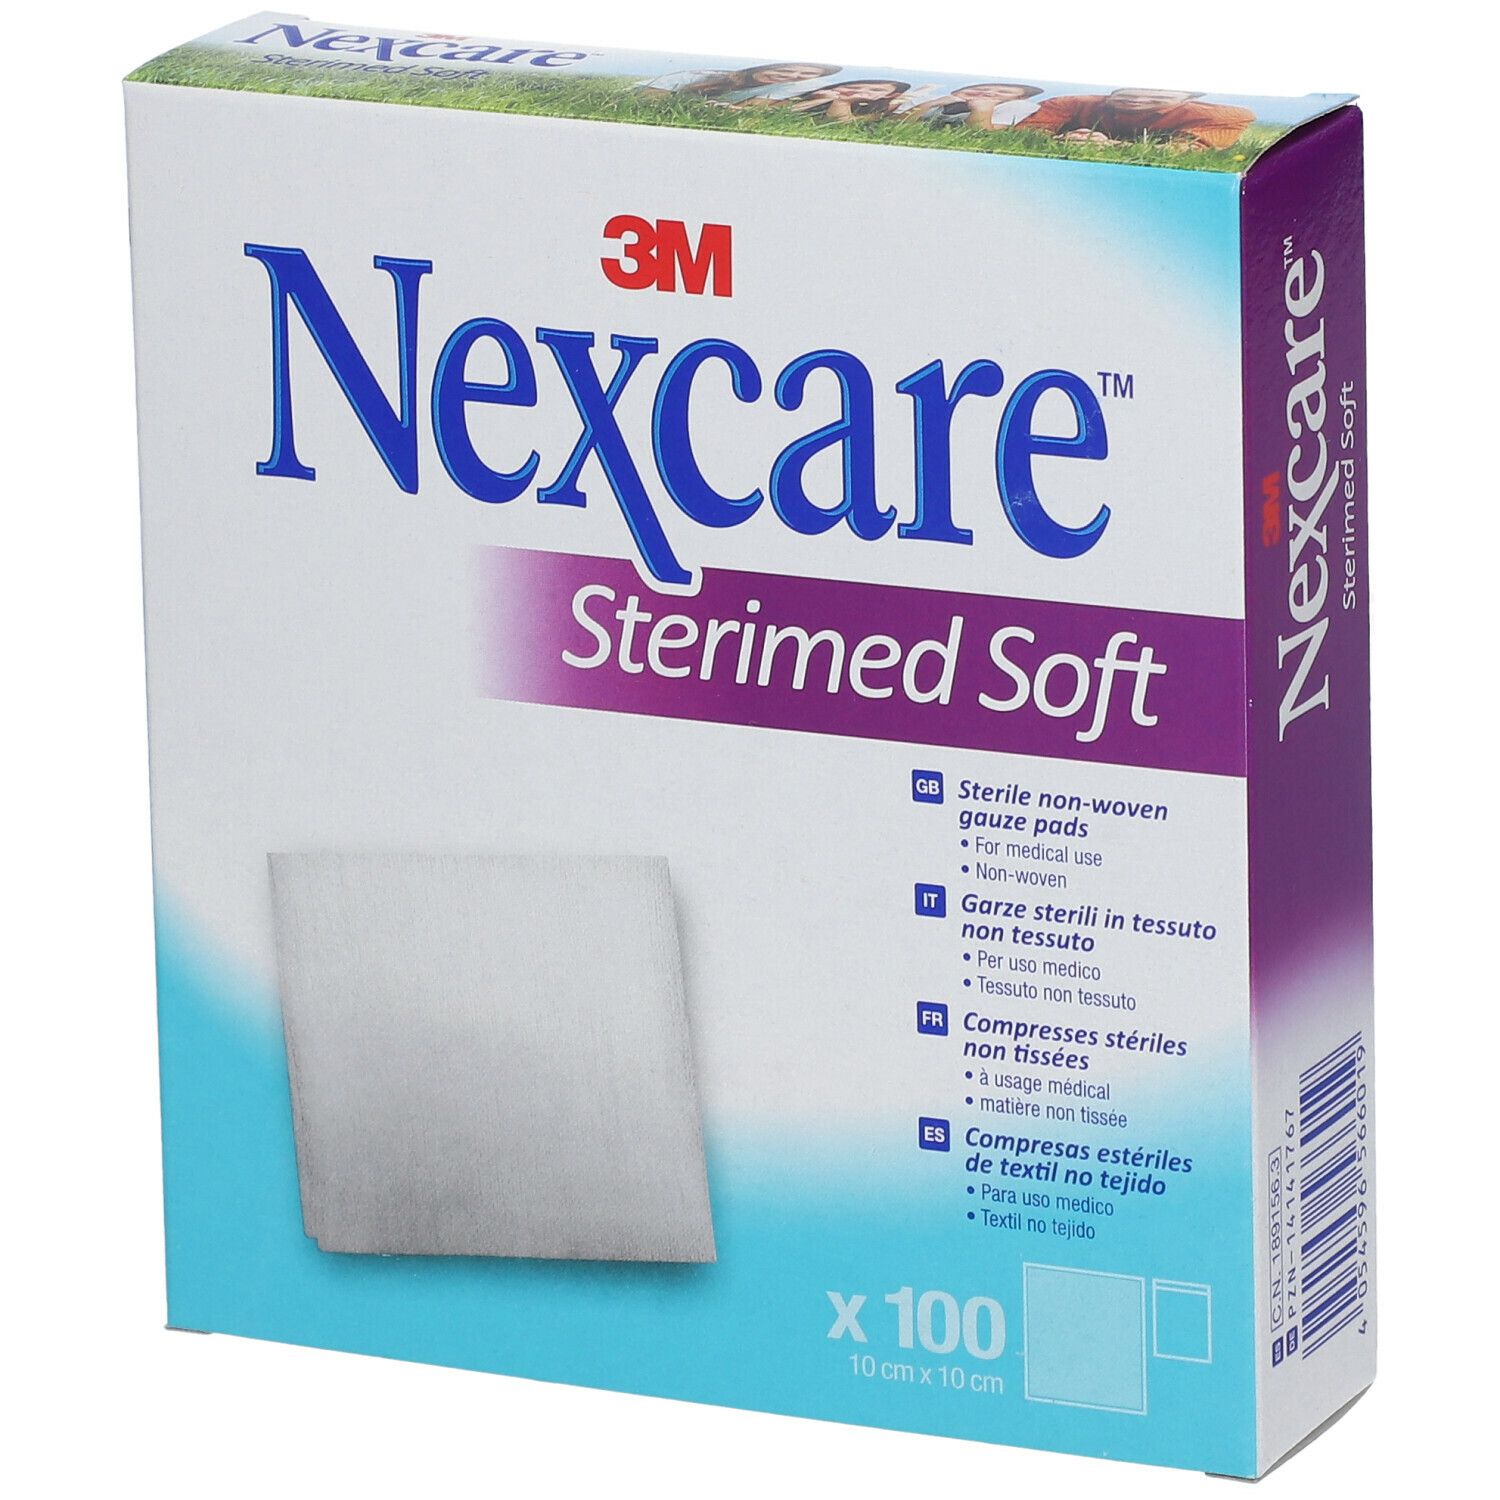 Image of 3M Nexcare™ Sterimed Soft 10 x 10 cm